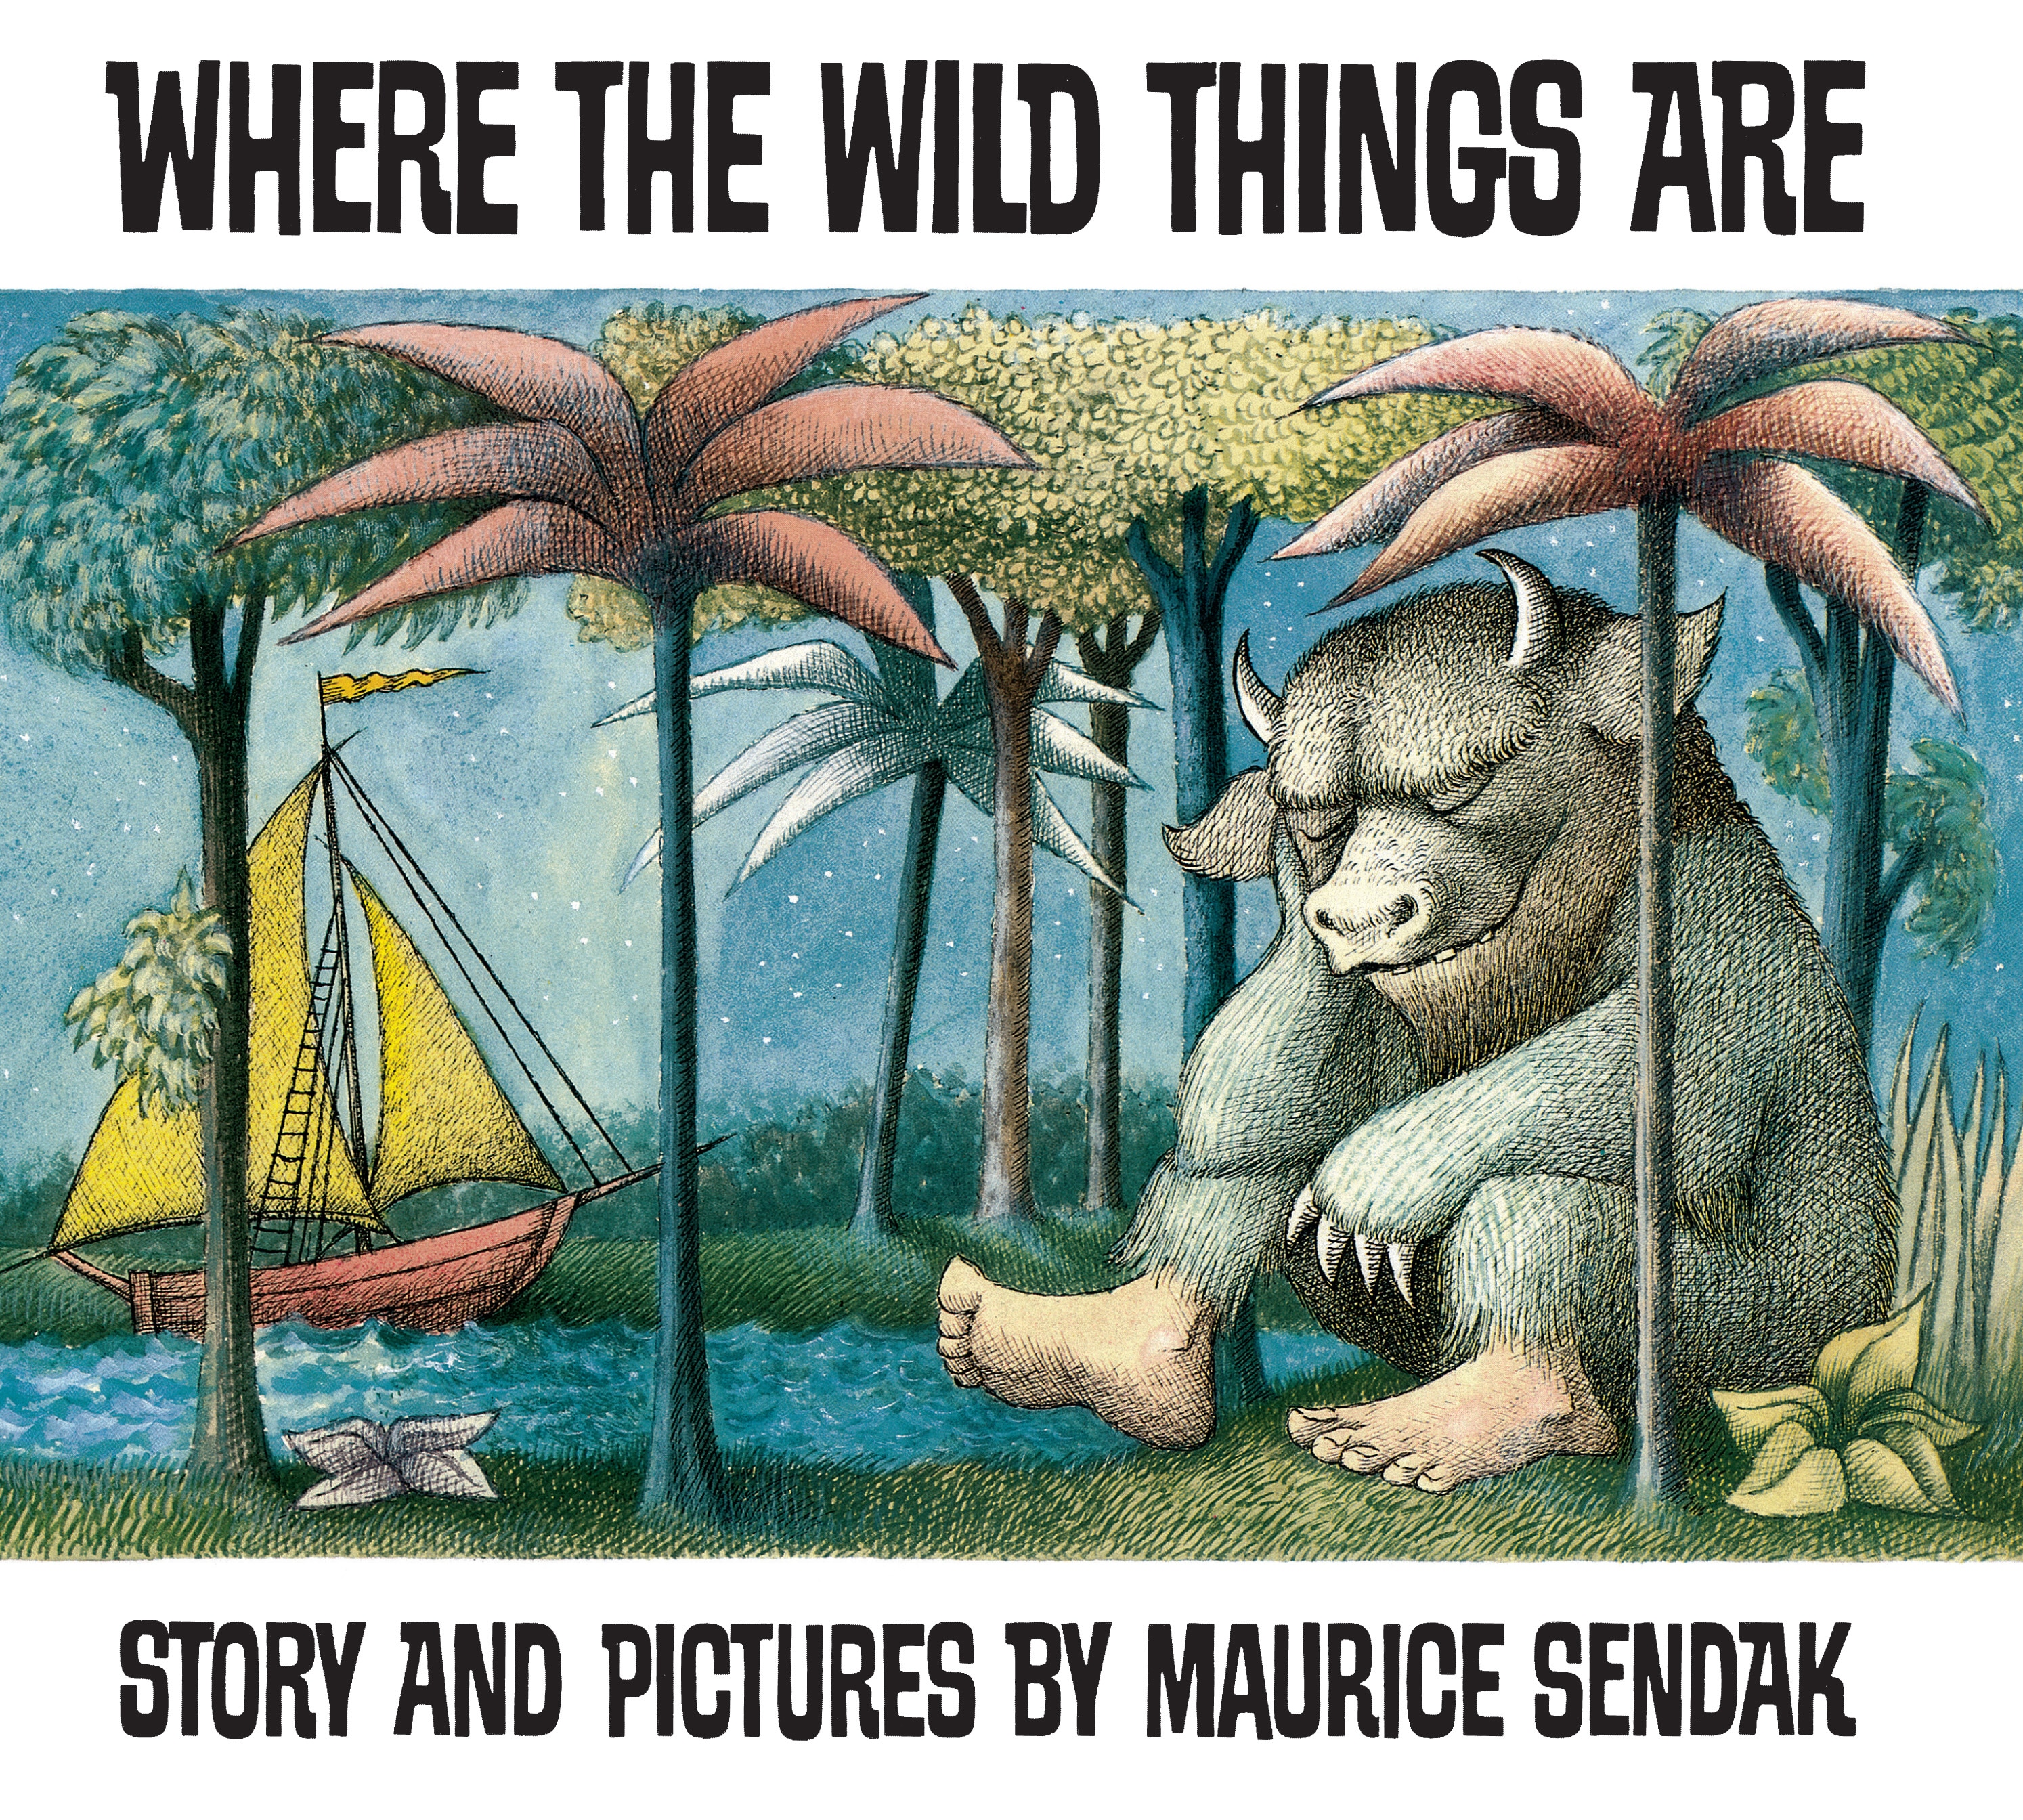 Book “Where The Wild Things Are” by Maurice Sendak — May 4, 2000